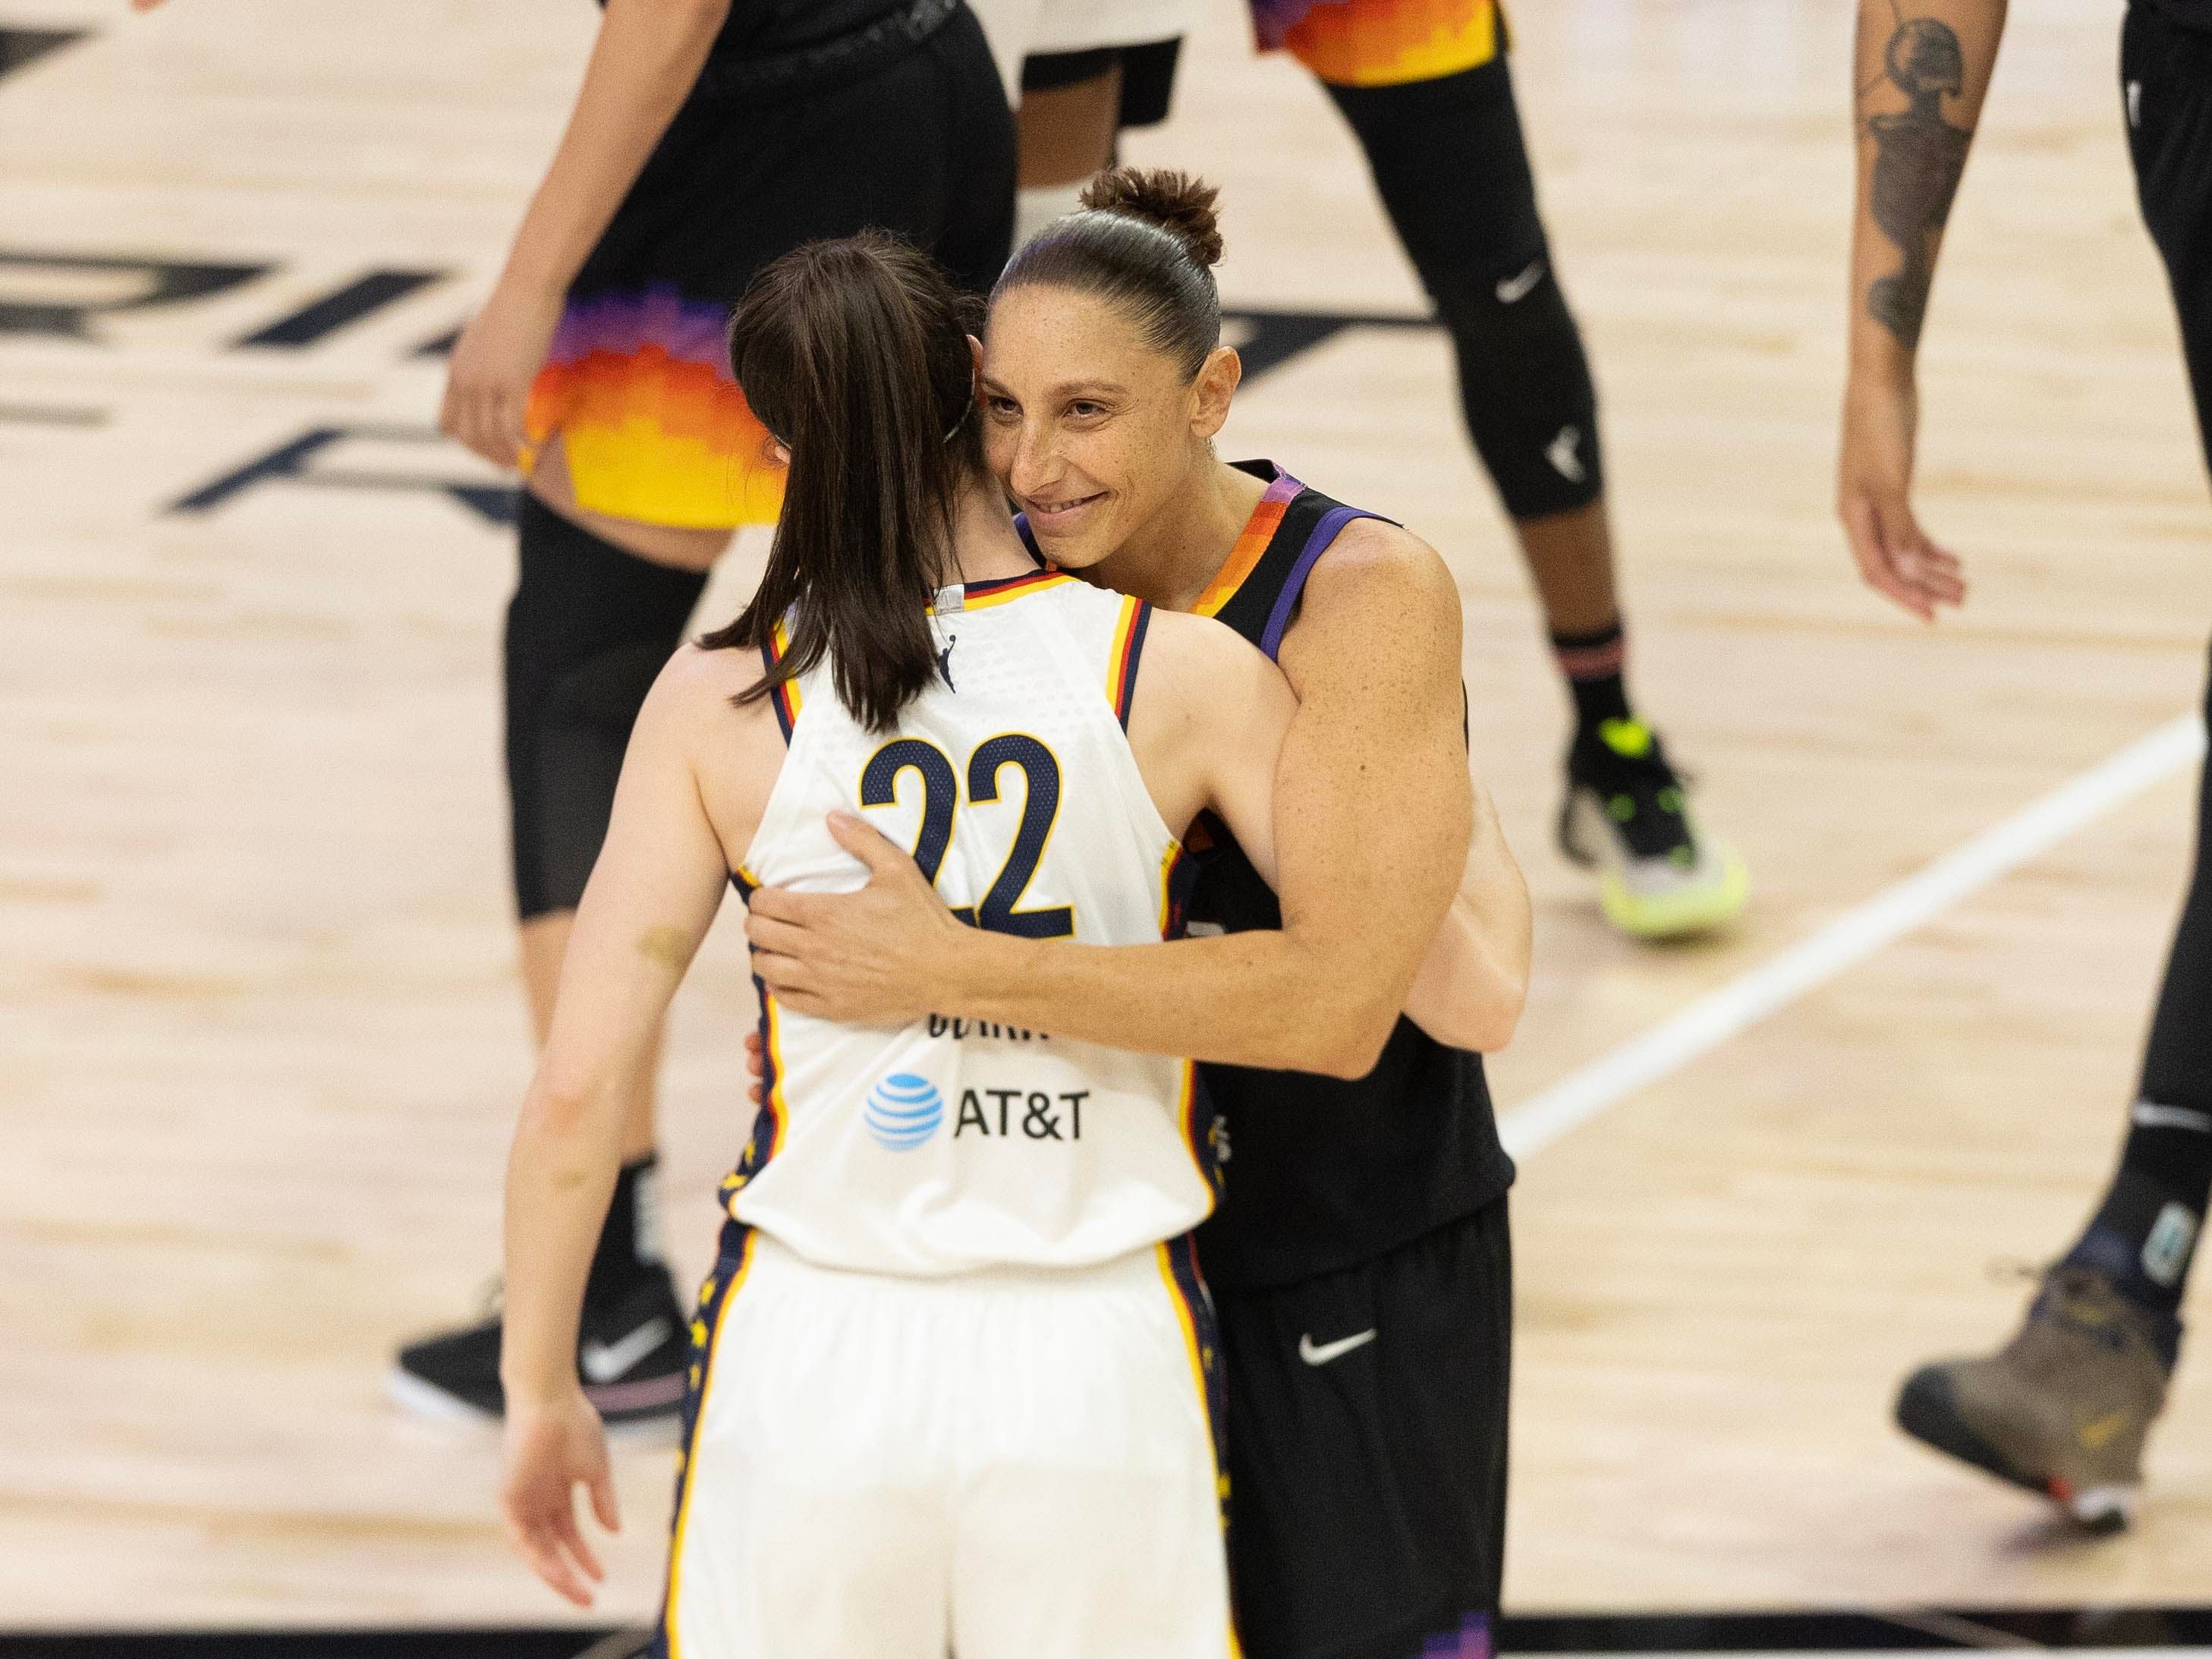 Caitlin Clark had some comments about Diana Taurasi after the game. (Photo: IMAGN)